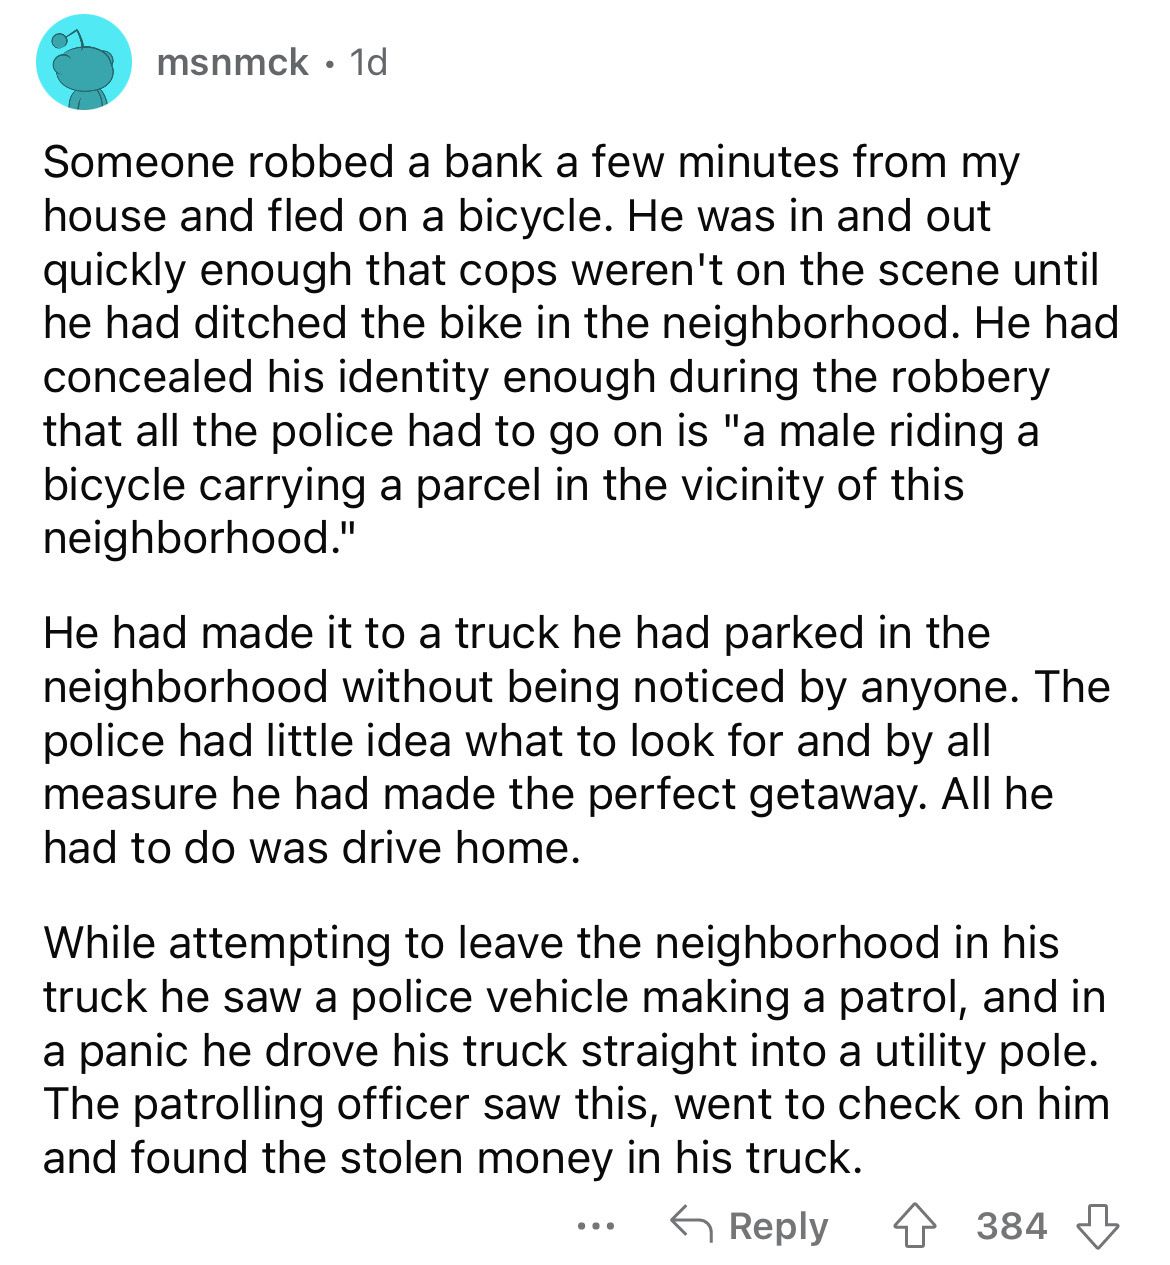 document - msnmck 1d Someone robbed a bank a few minutes from my house and fled on a bicycle. He was in and out quickly enough that cops weren't on the scene until he had ditched the bike in the neighborhood. He had concealed his identity enough during th